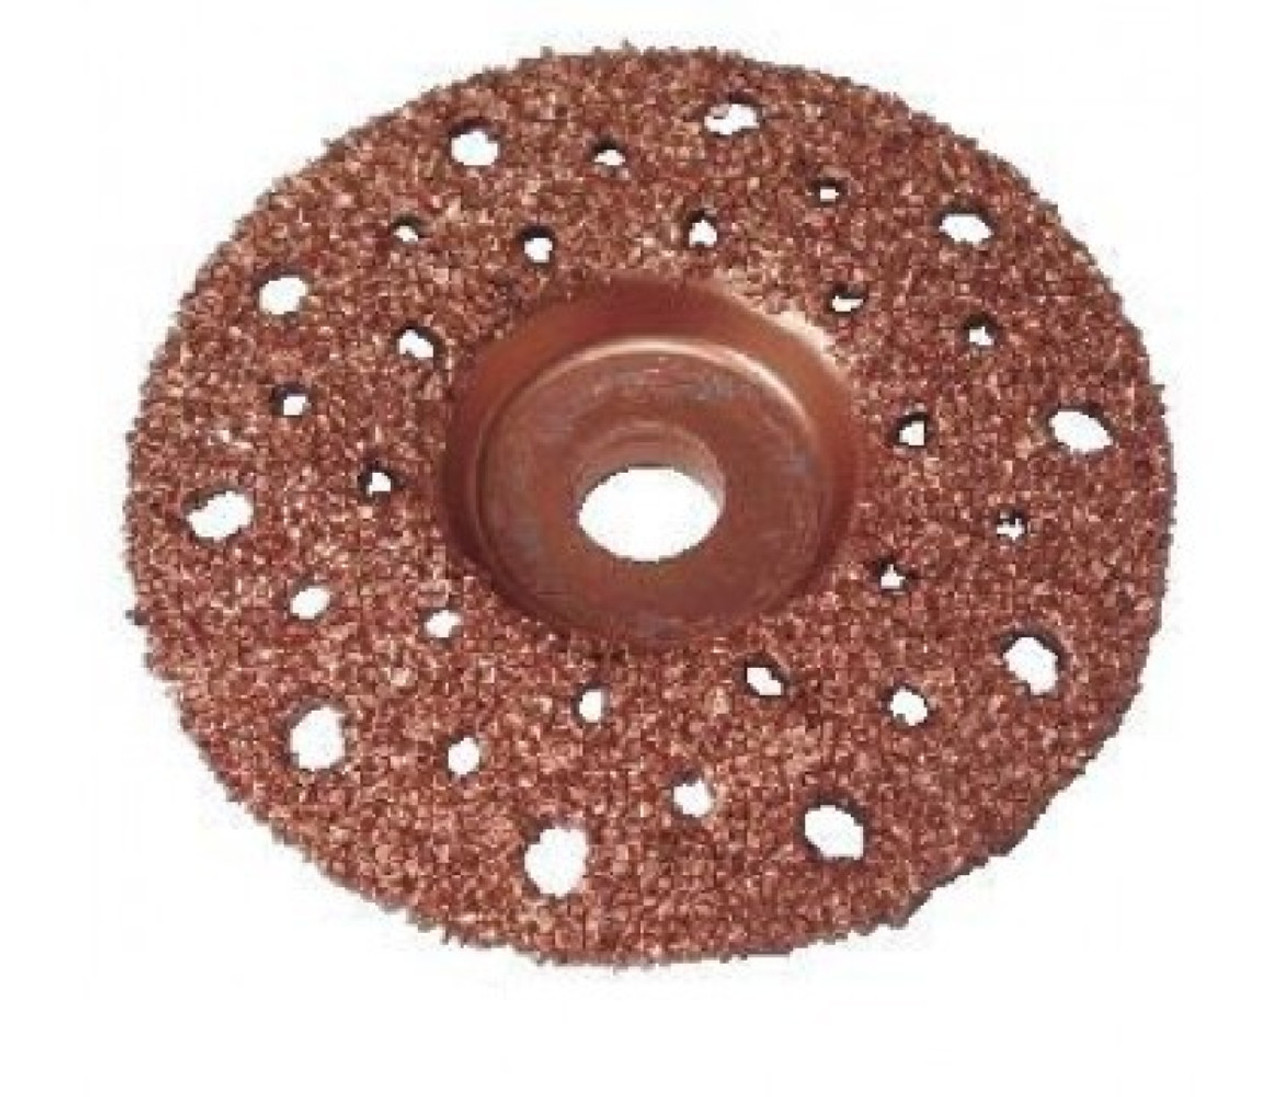 Tire Grinding Disc 4"